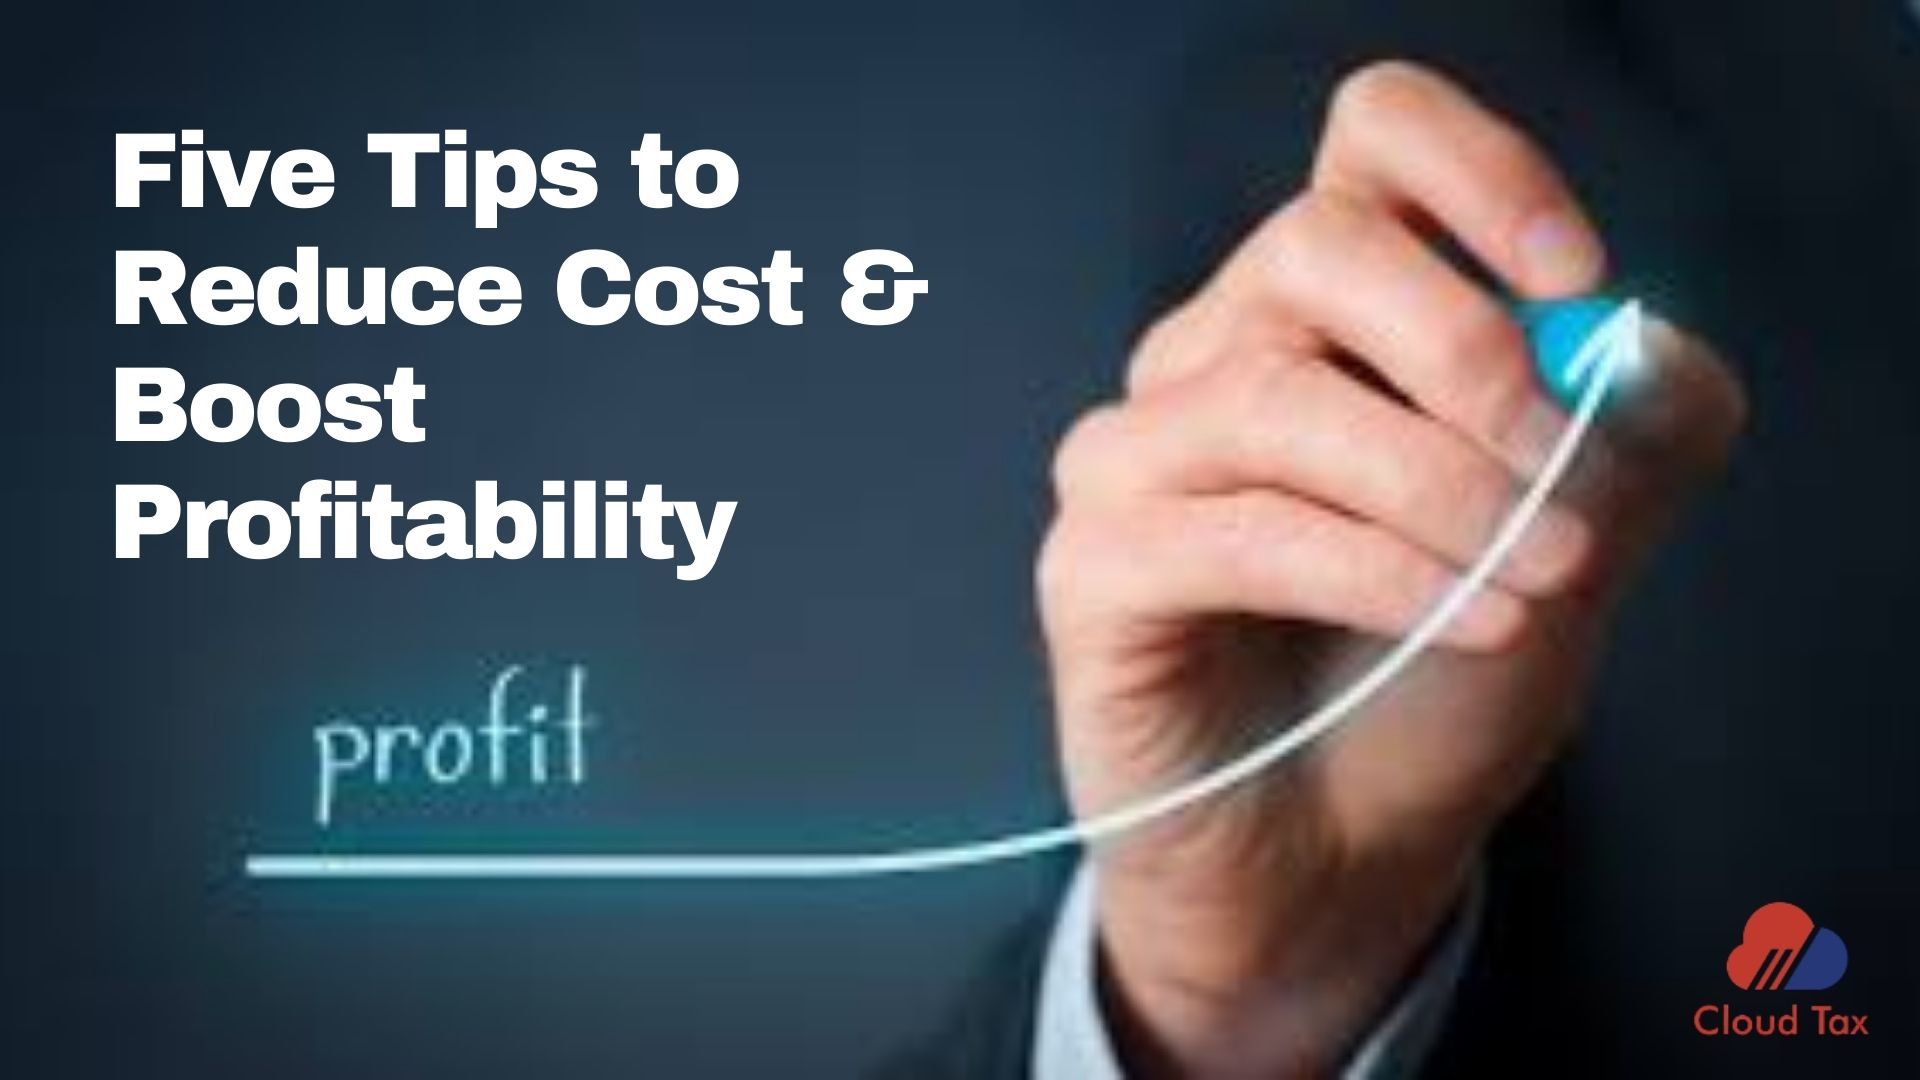 Five Tips to Reduce Cost & Boost Profitability